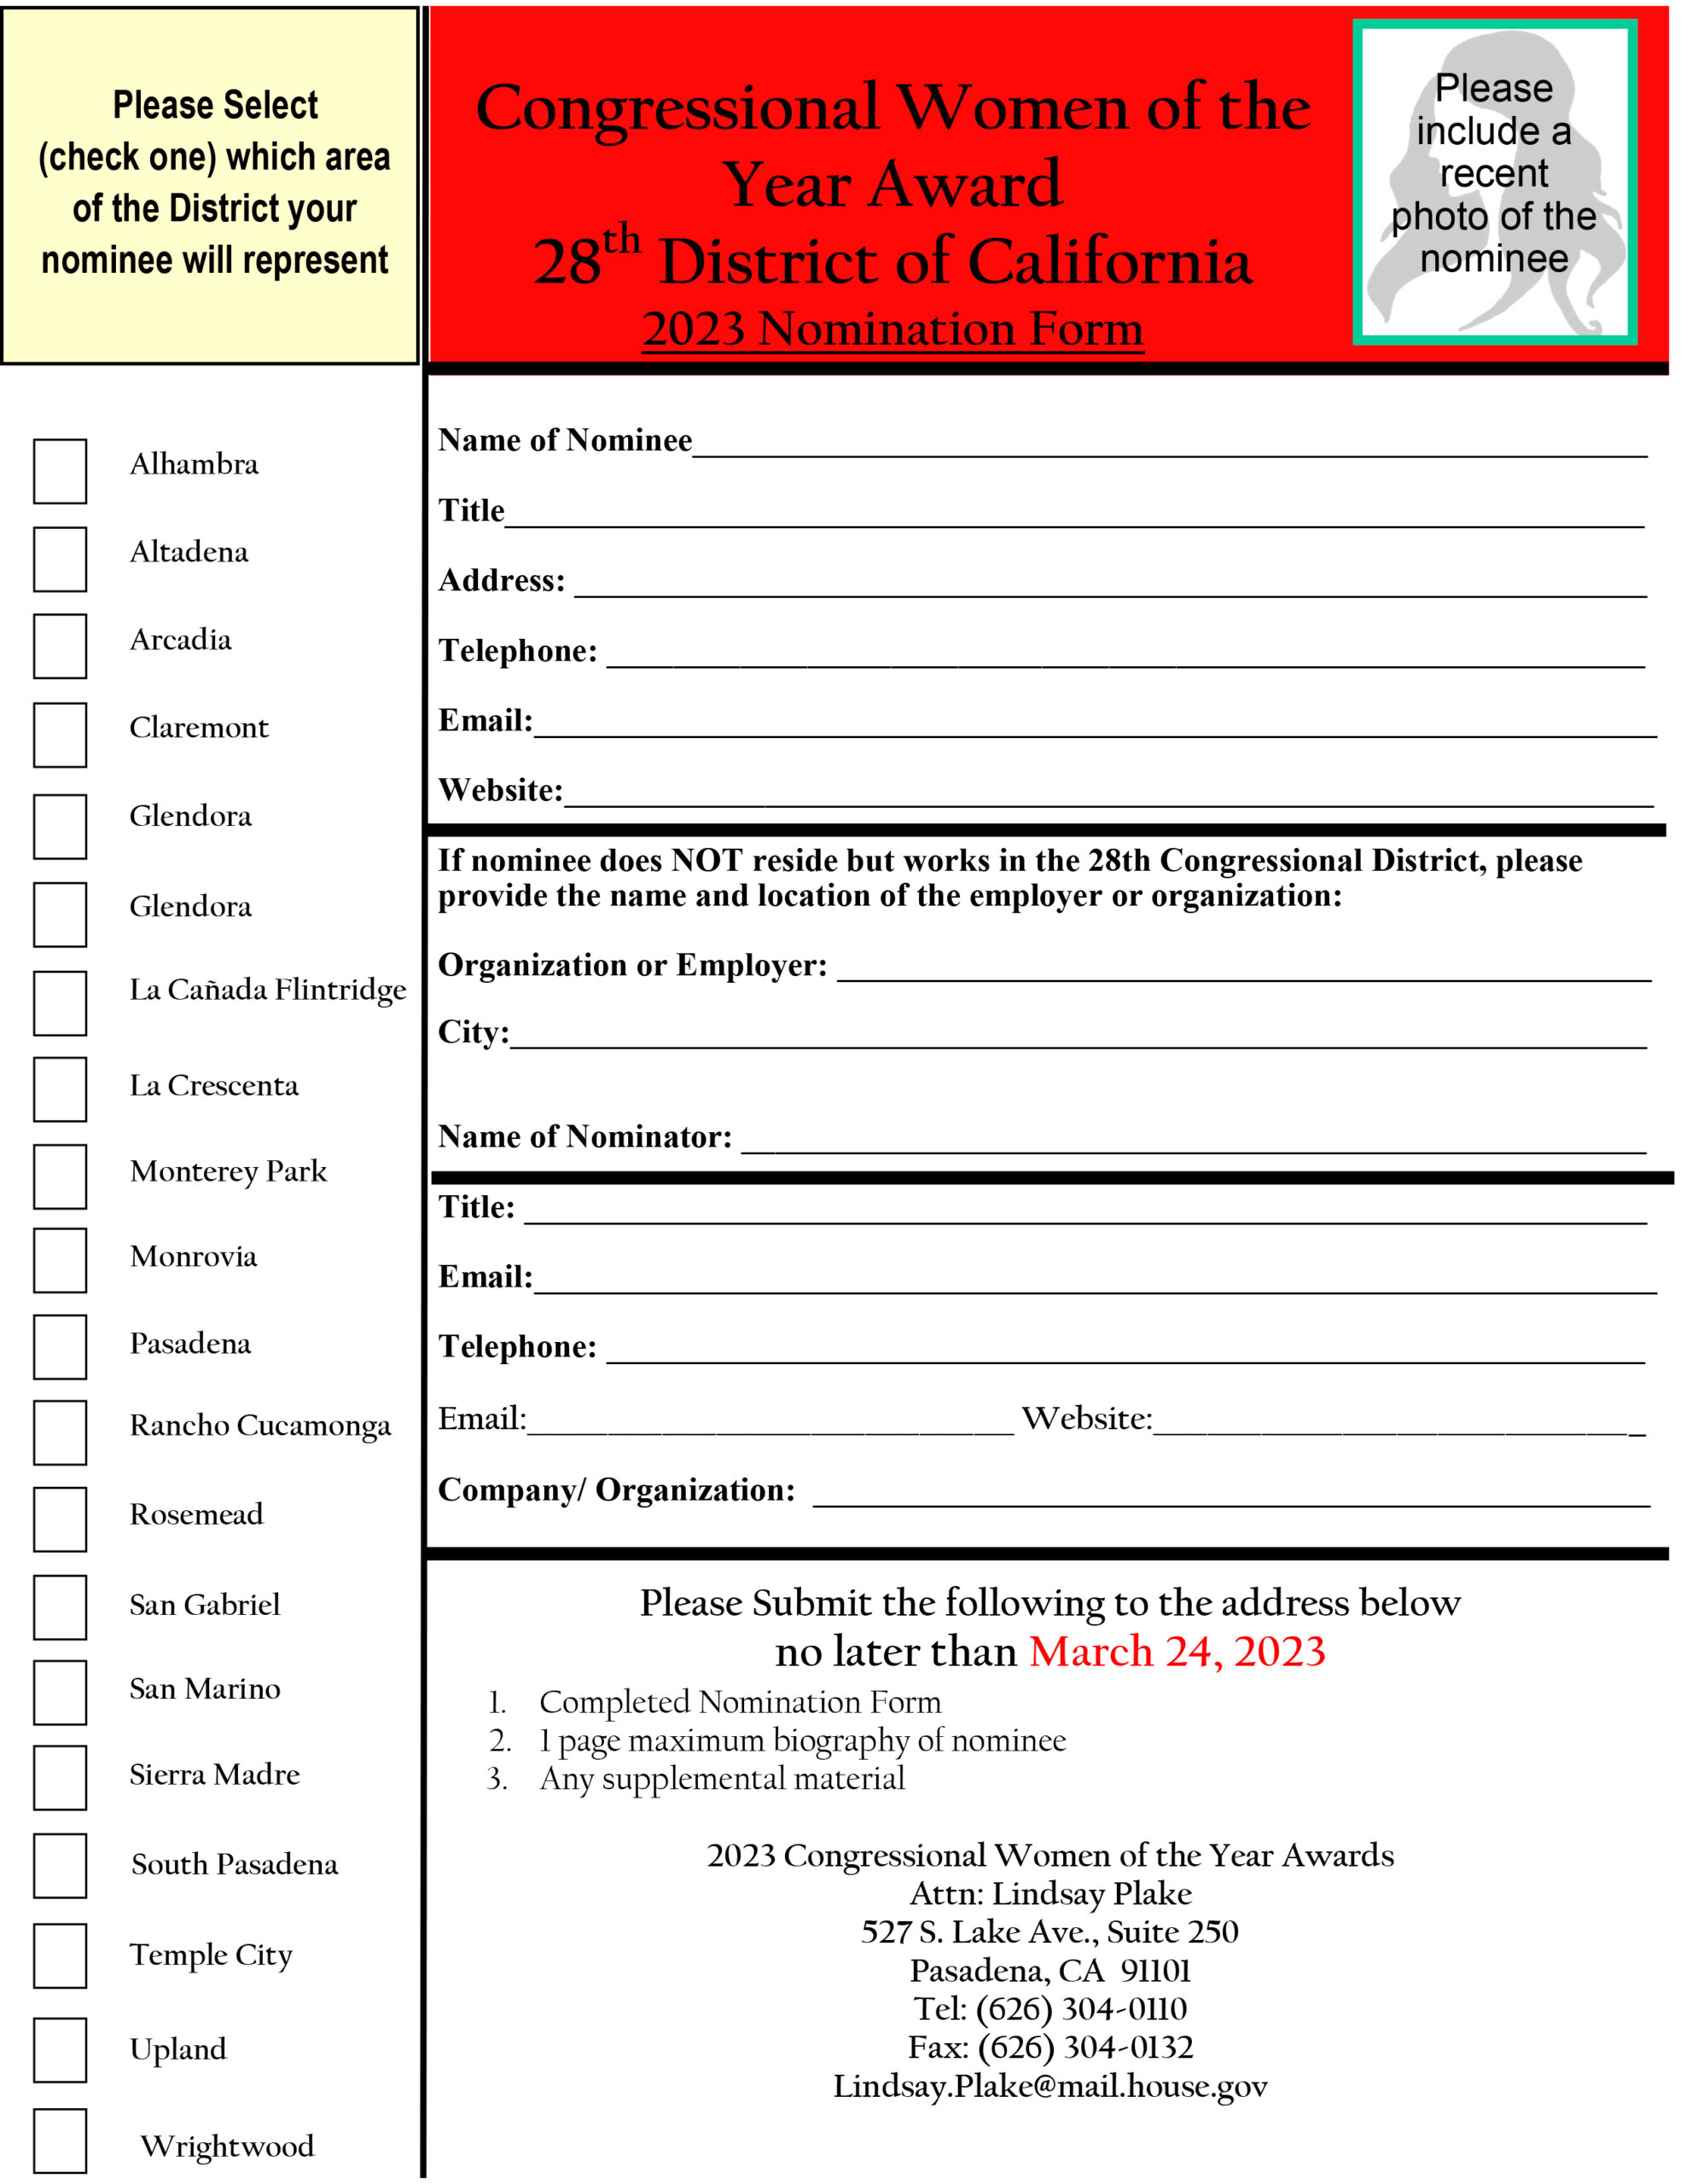 Congresswoman Judy Chu's woman of the year awards nomination form 